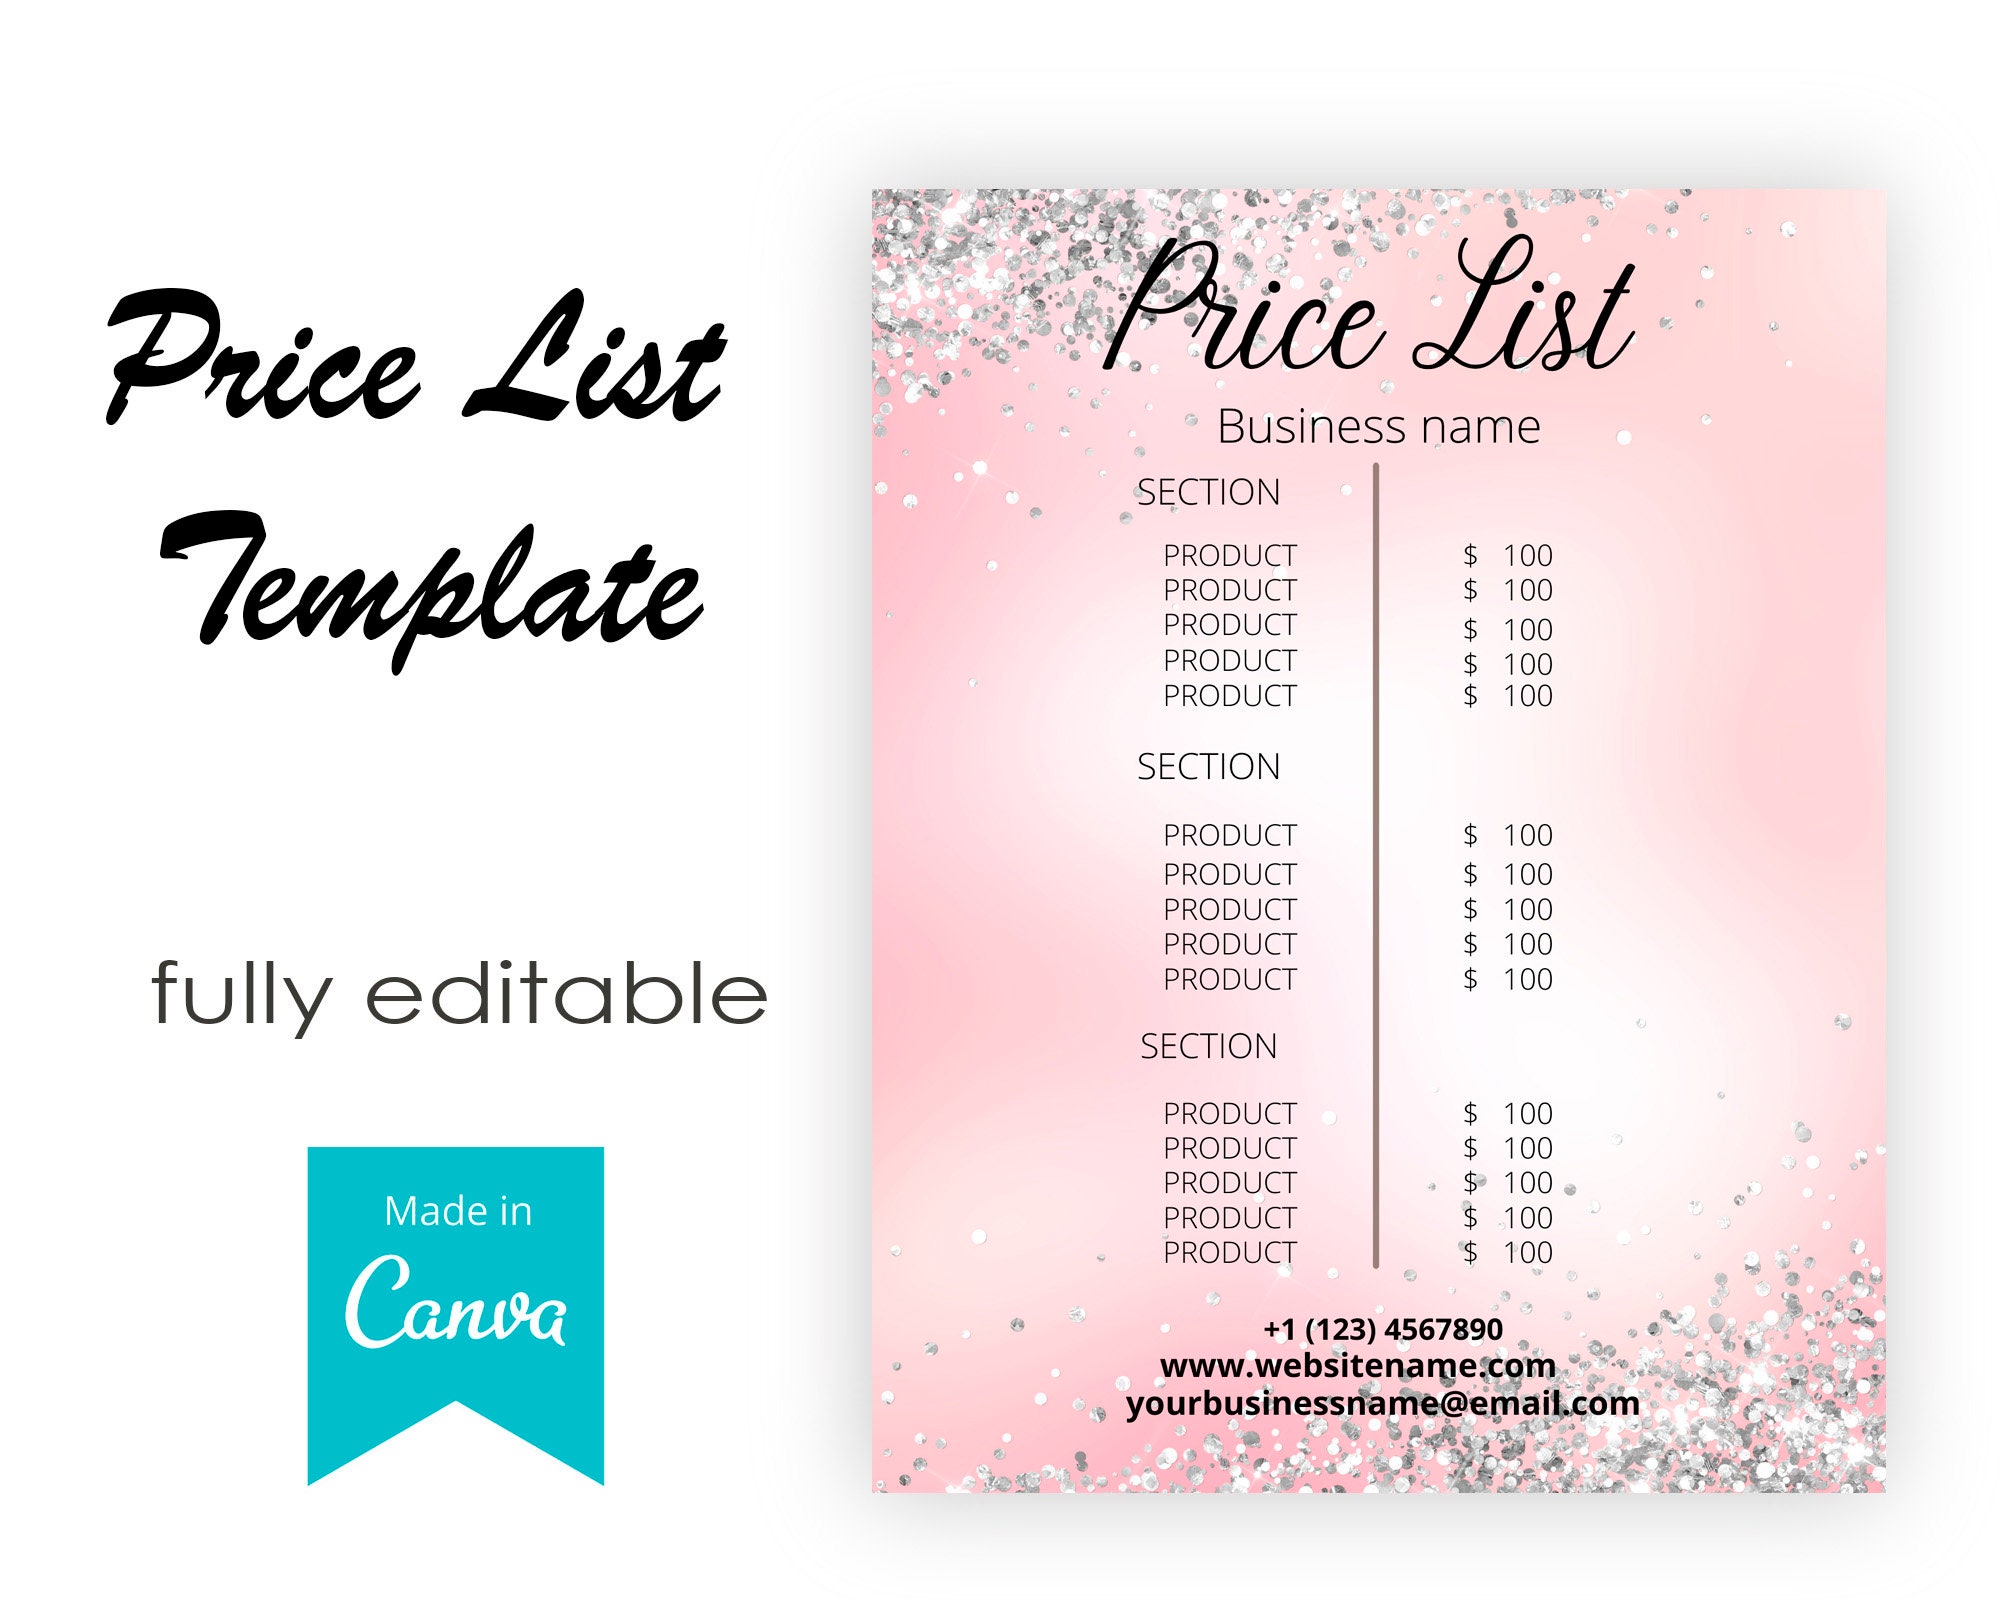 Price list Template editable in Canva Blush pink Pricelist | Etsy